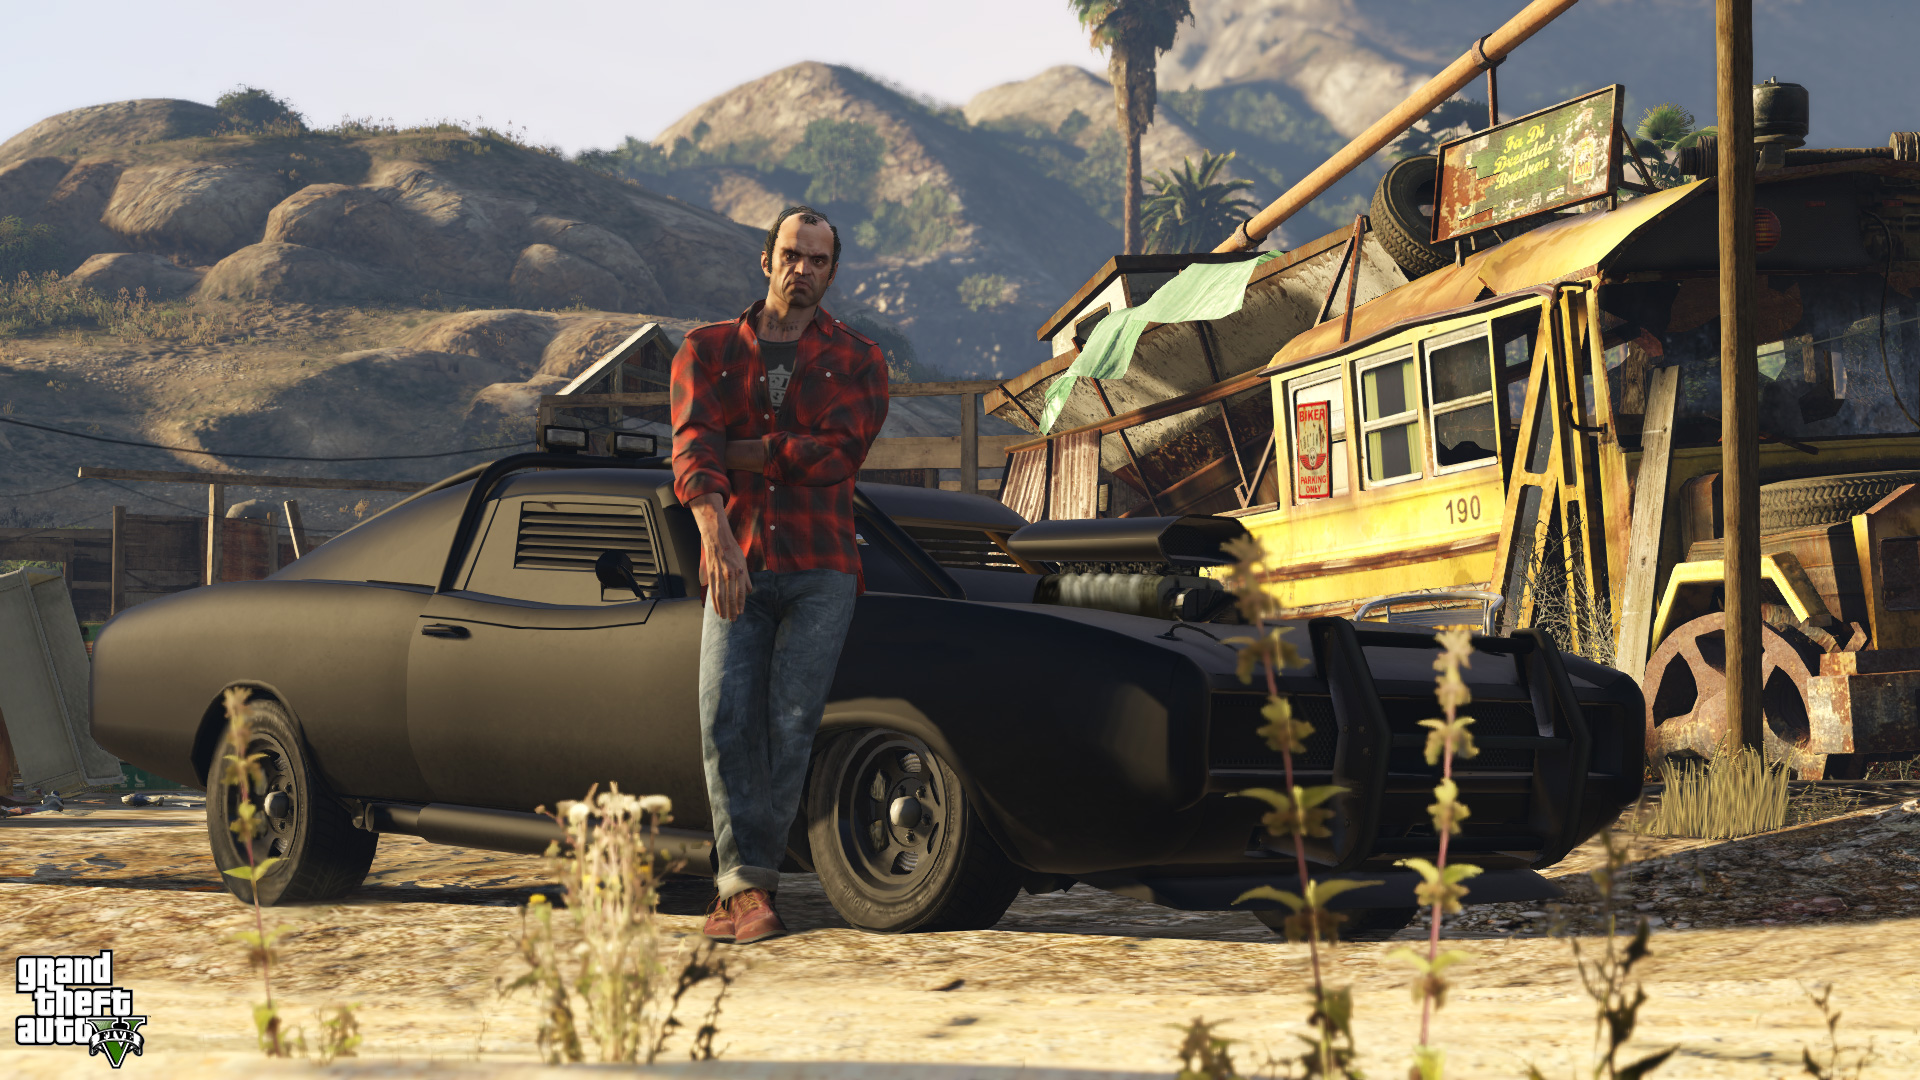 GTA V on PS4 - see the difference